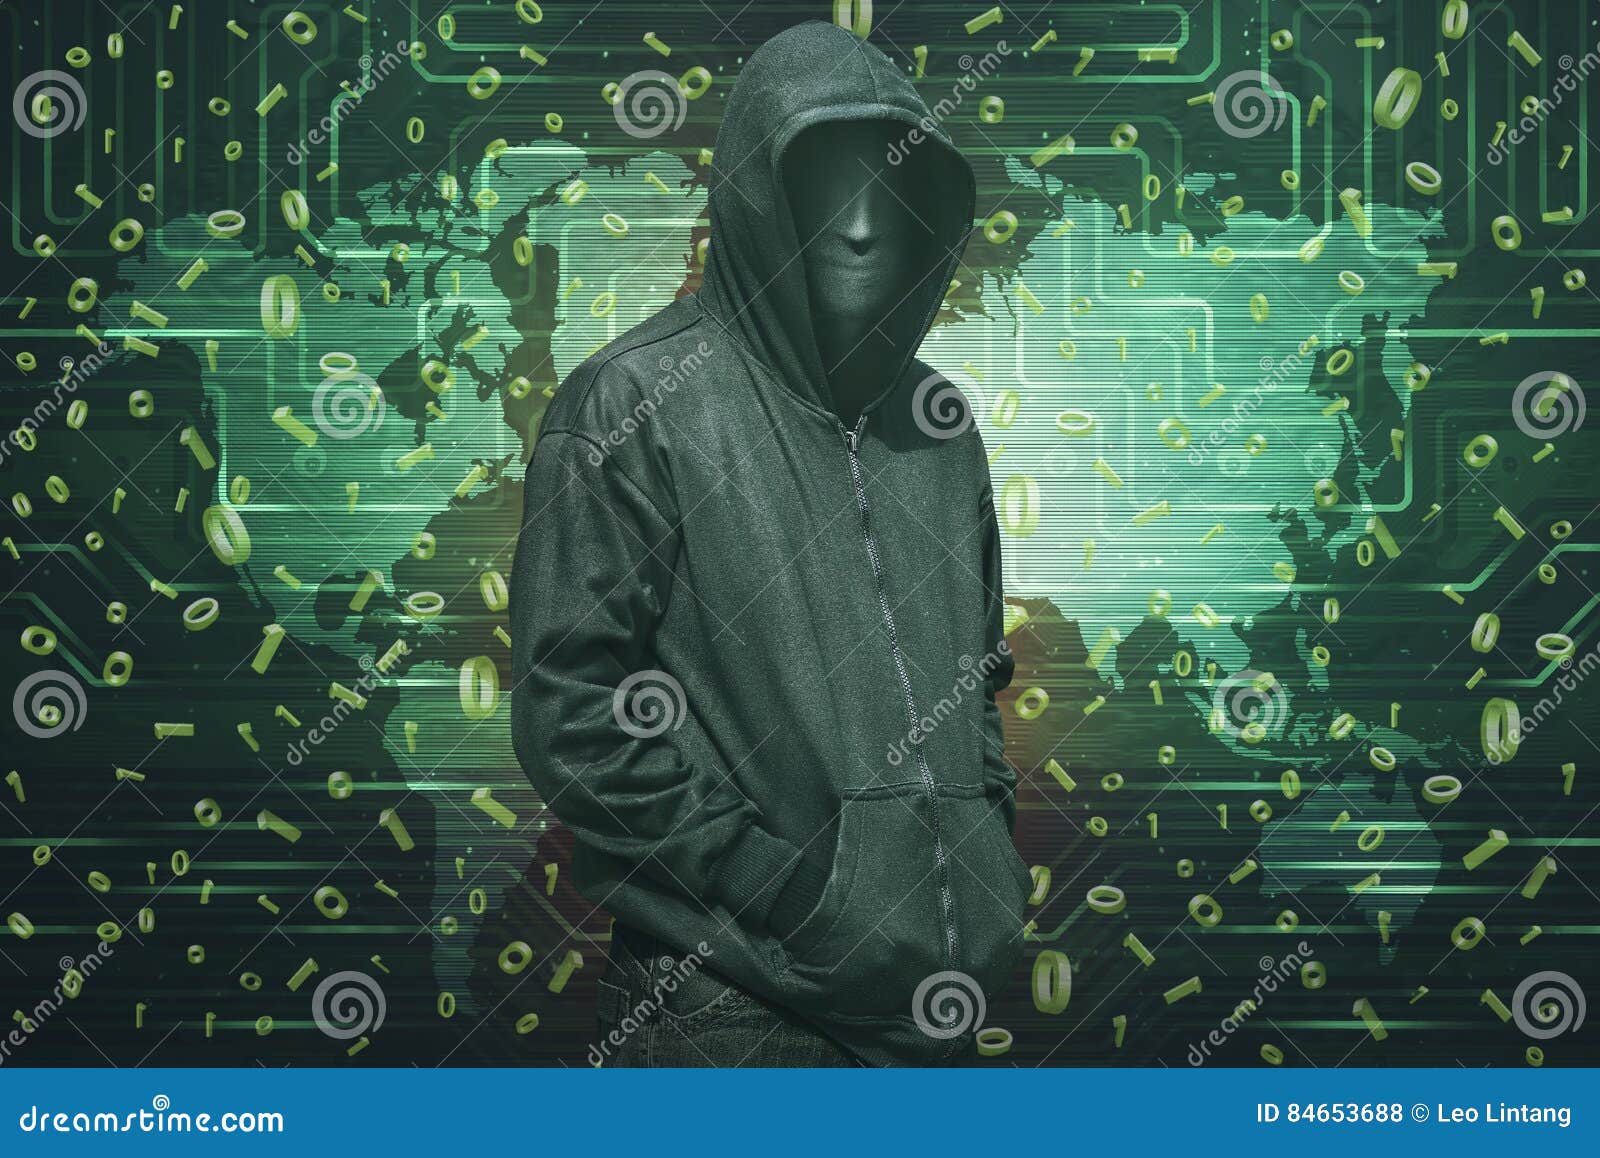 hooded hacker with anonymous mask standing